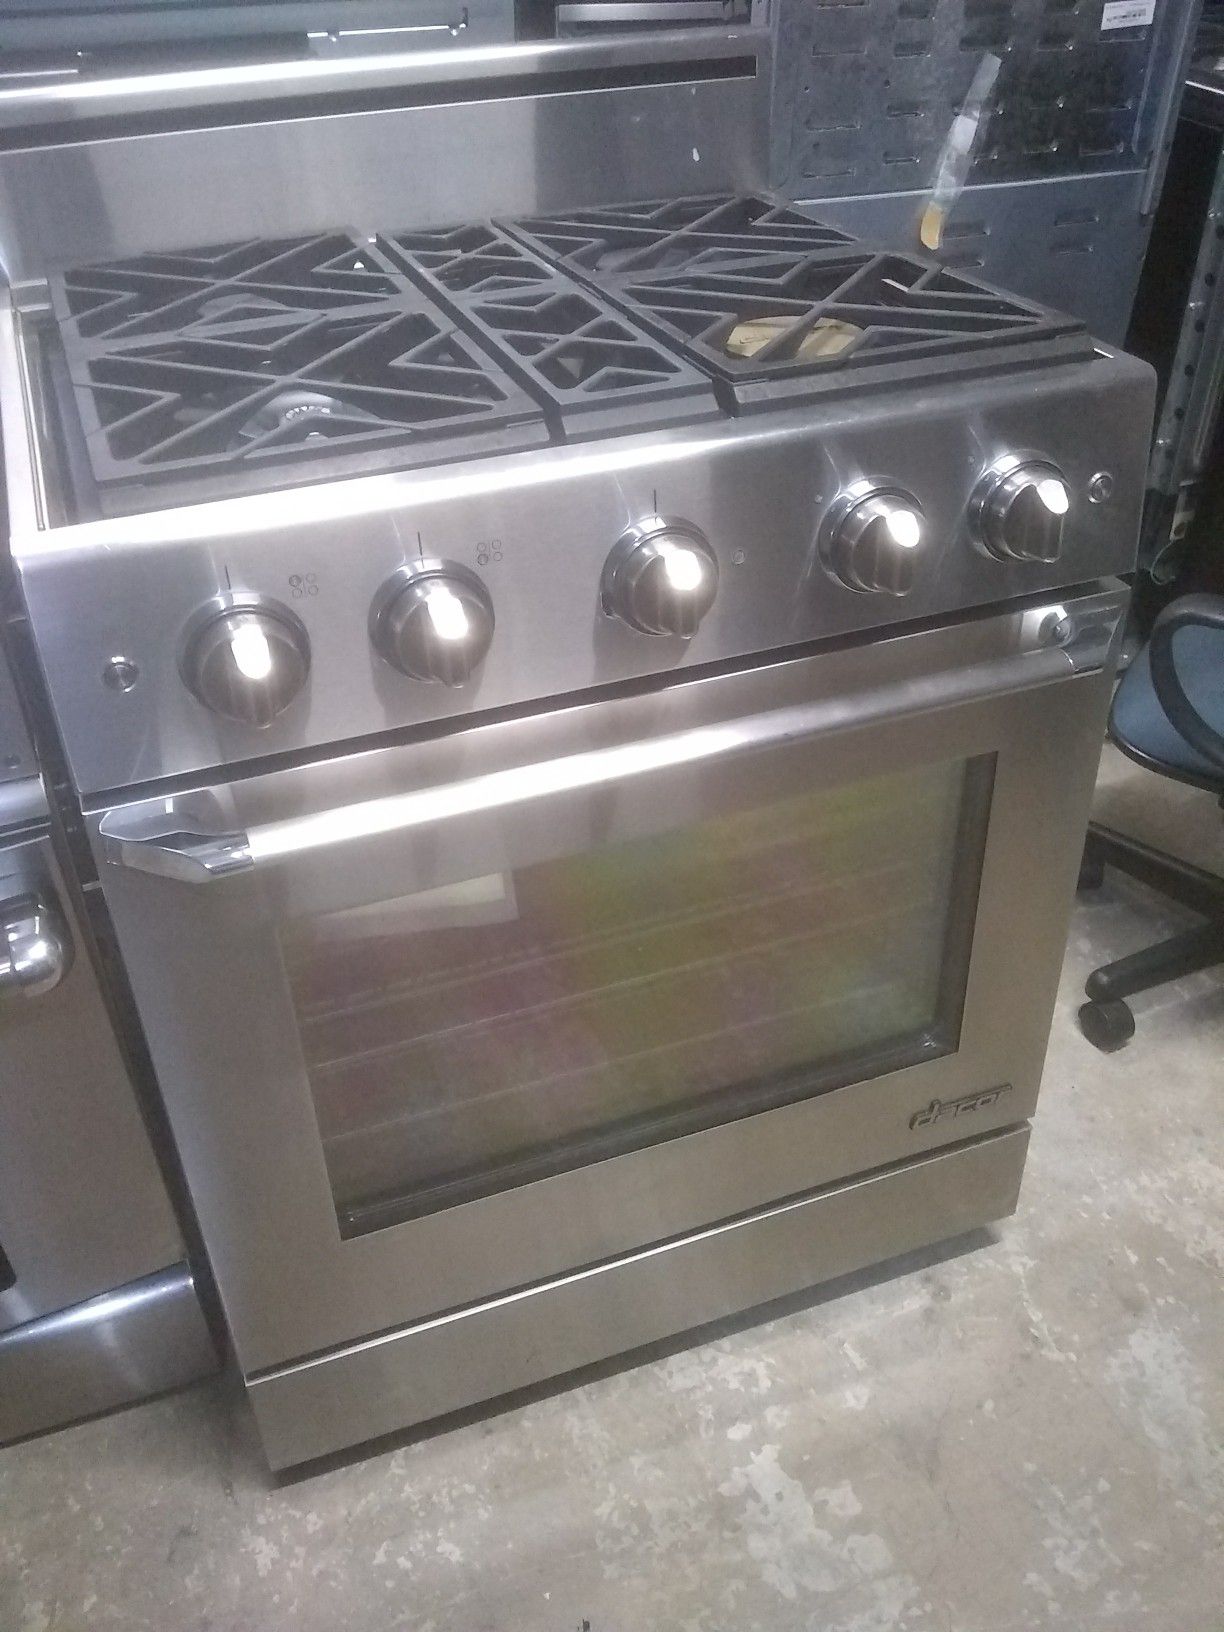 Dacor stainless steel kitchen and home appliances stove